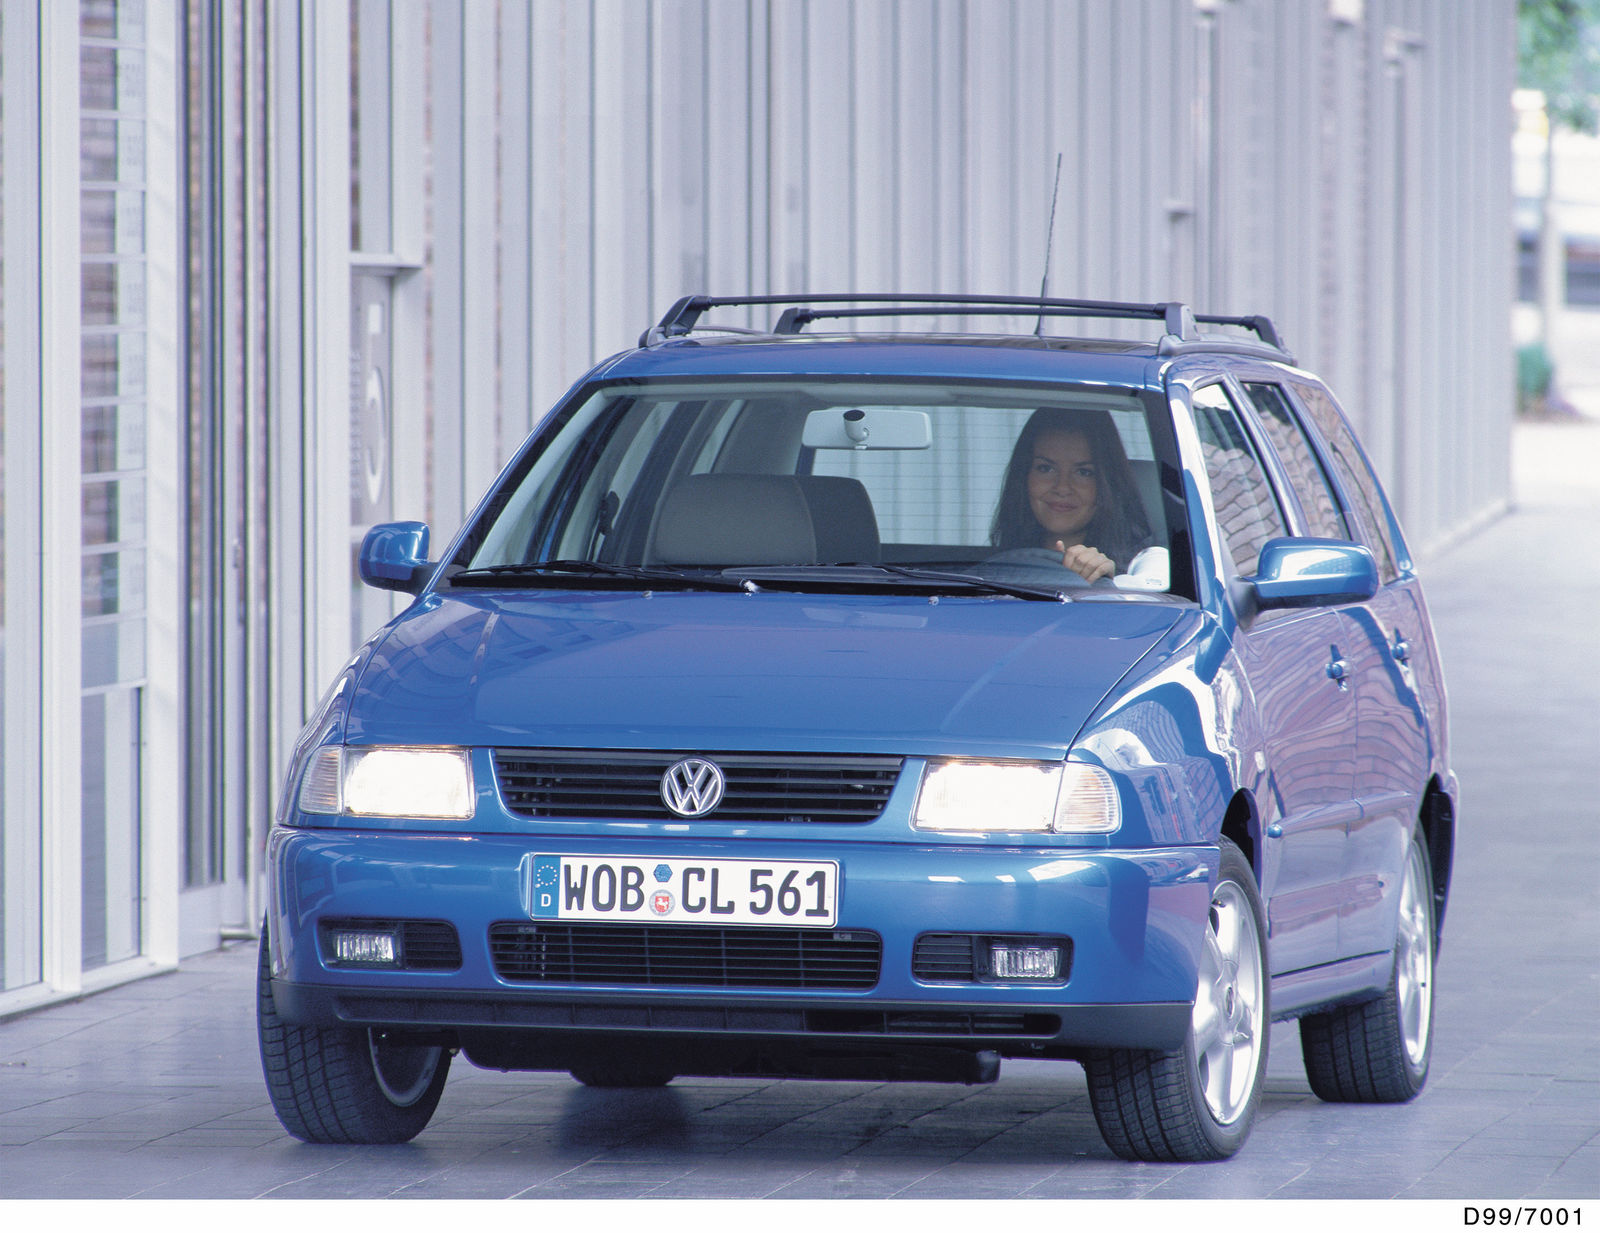 Product: Polo Variant (1999)